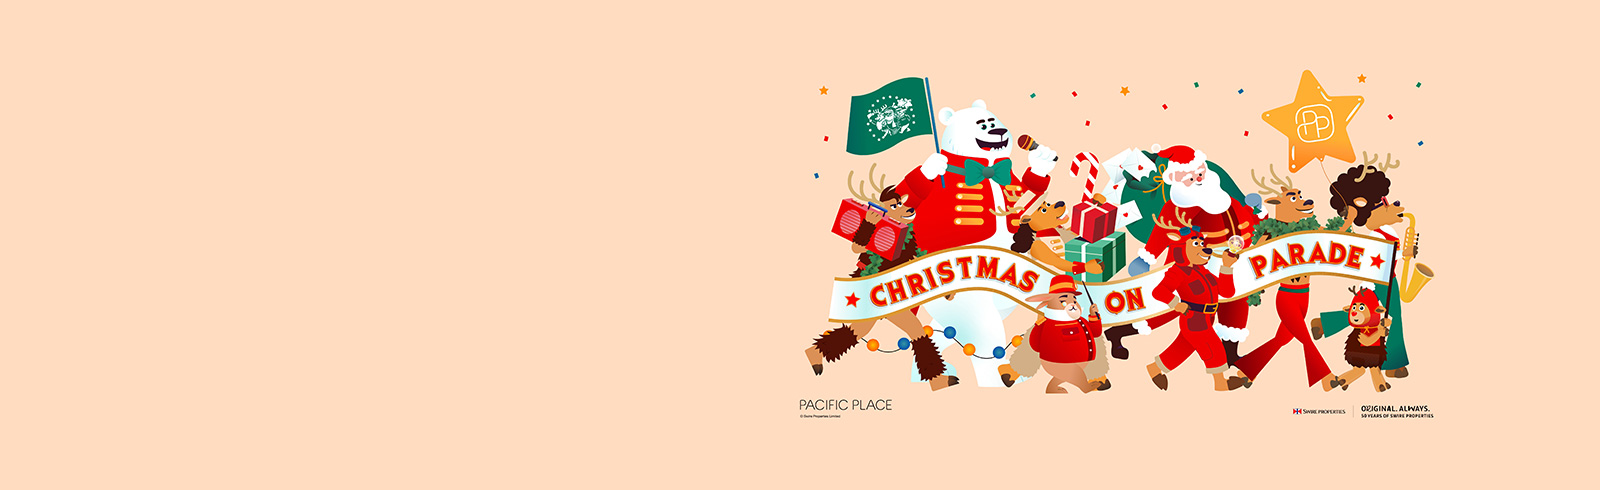 Christmas cartoon, used to promote Pacific Place offer for Standard Chartered Cathay Mastercard